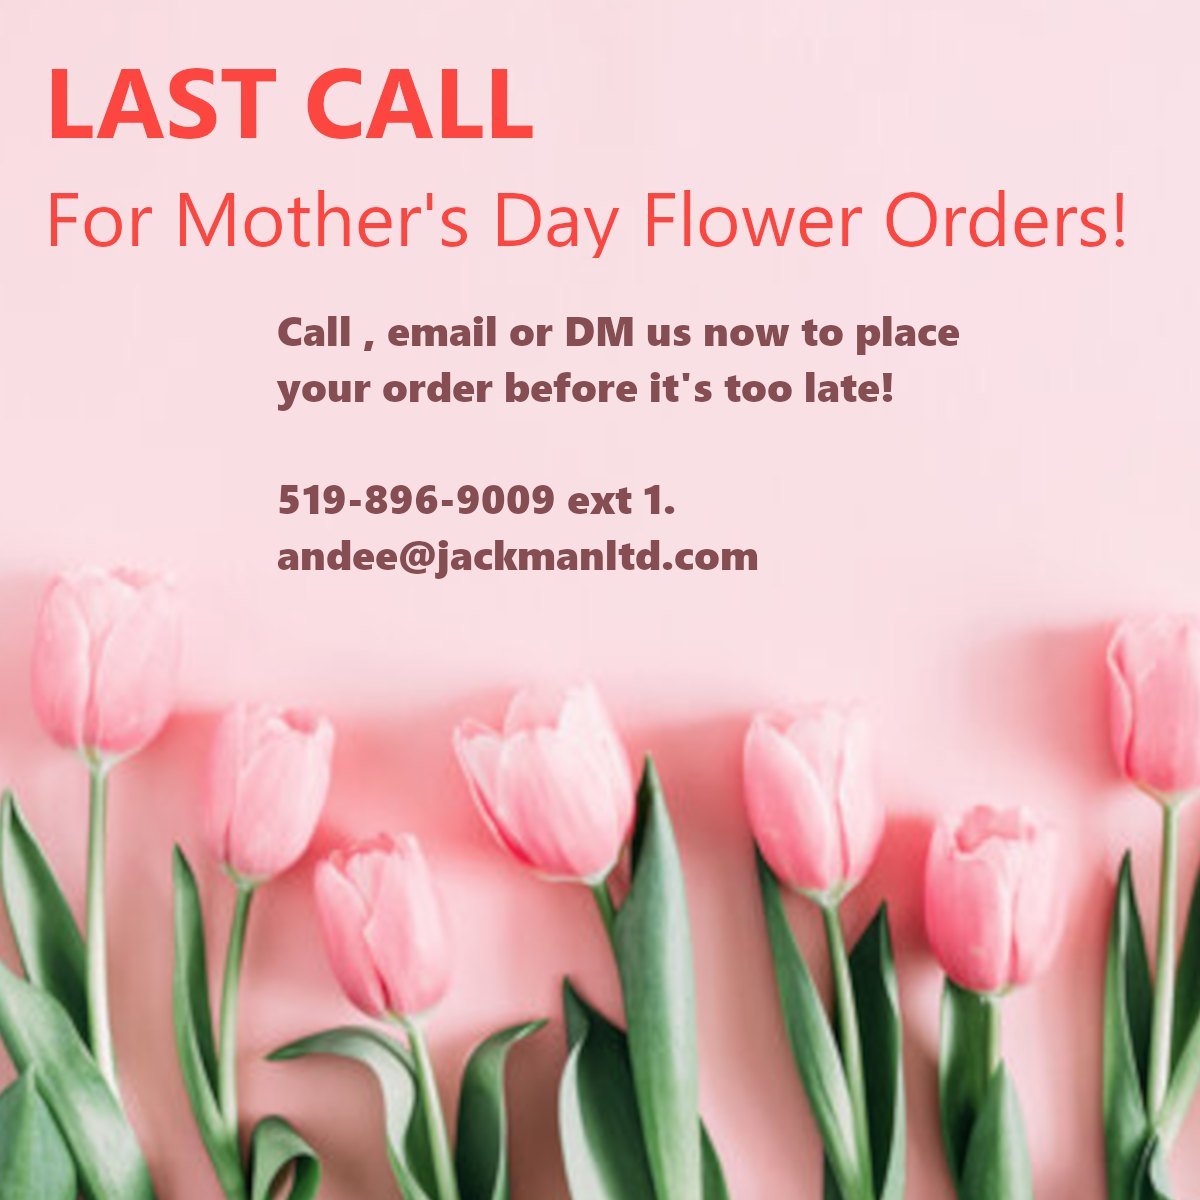 The LAST DAY to order Mother's Day Flowers is tomorrow!!!
-
Don't forget to order asap so you can show that special someone how much you appreciate them for all they do and how they've helped you grow. Deadline is April 30th at 4:30pm. 
-
All proceed